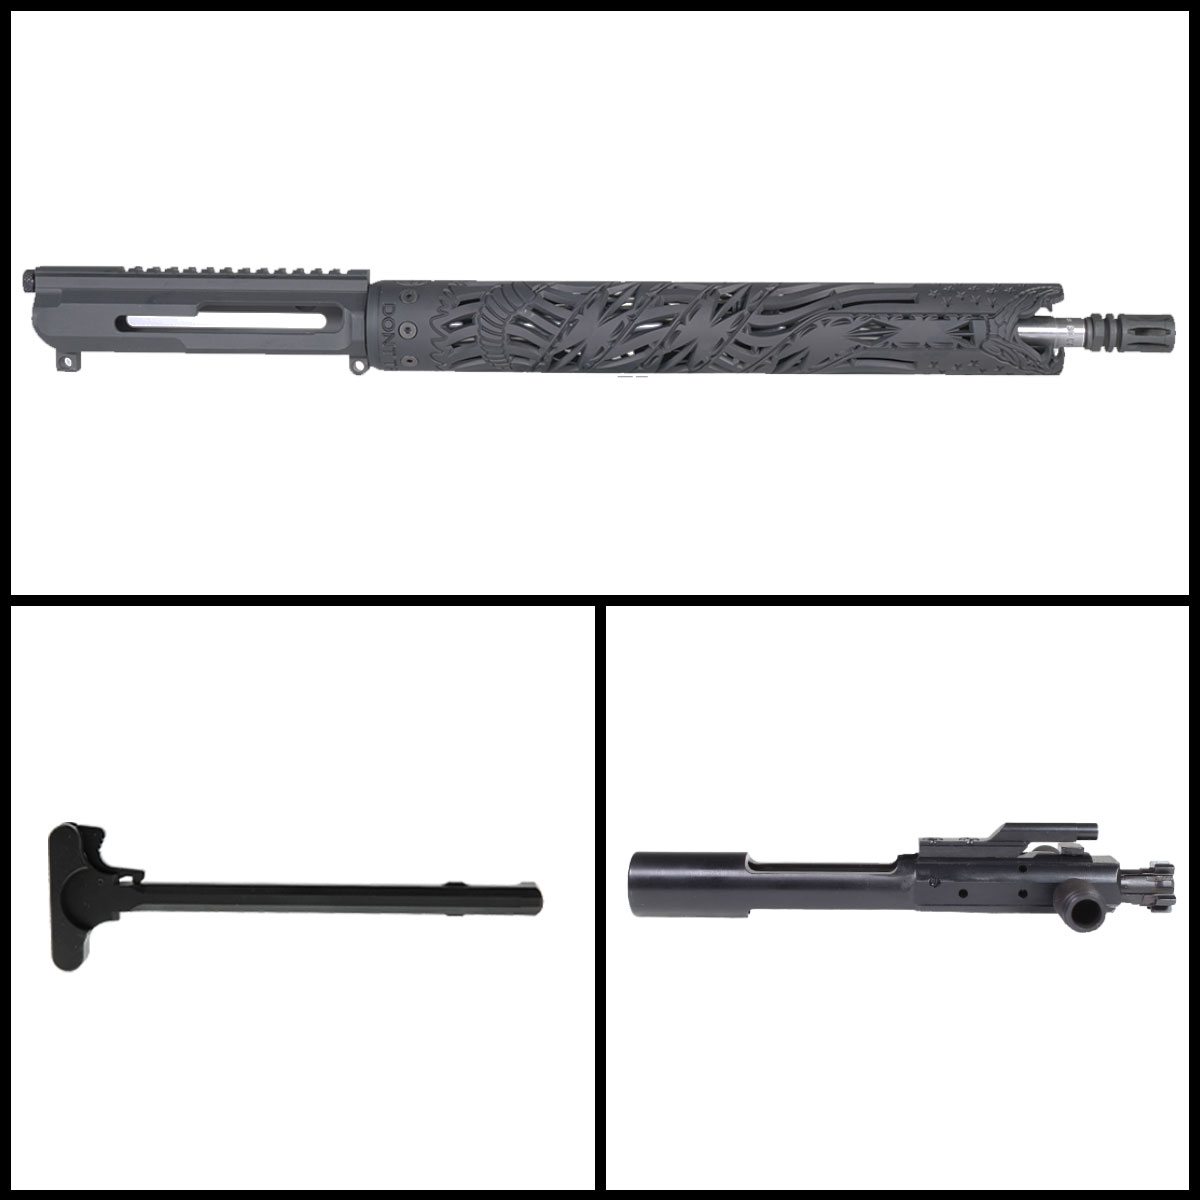 Davidson Defense 'Join or Die' 16-inch AR-15 .223 Wylde Stainless Side-Charging Rifle Complete Upper Build